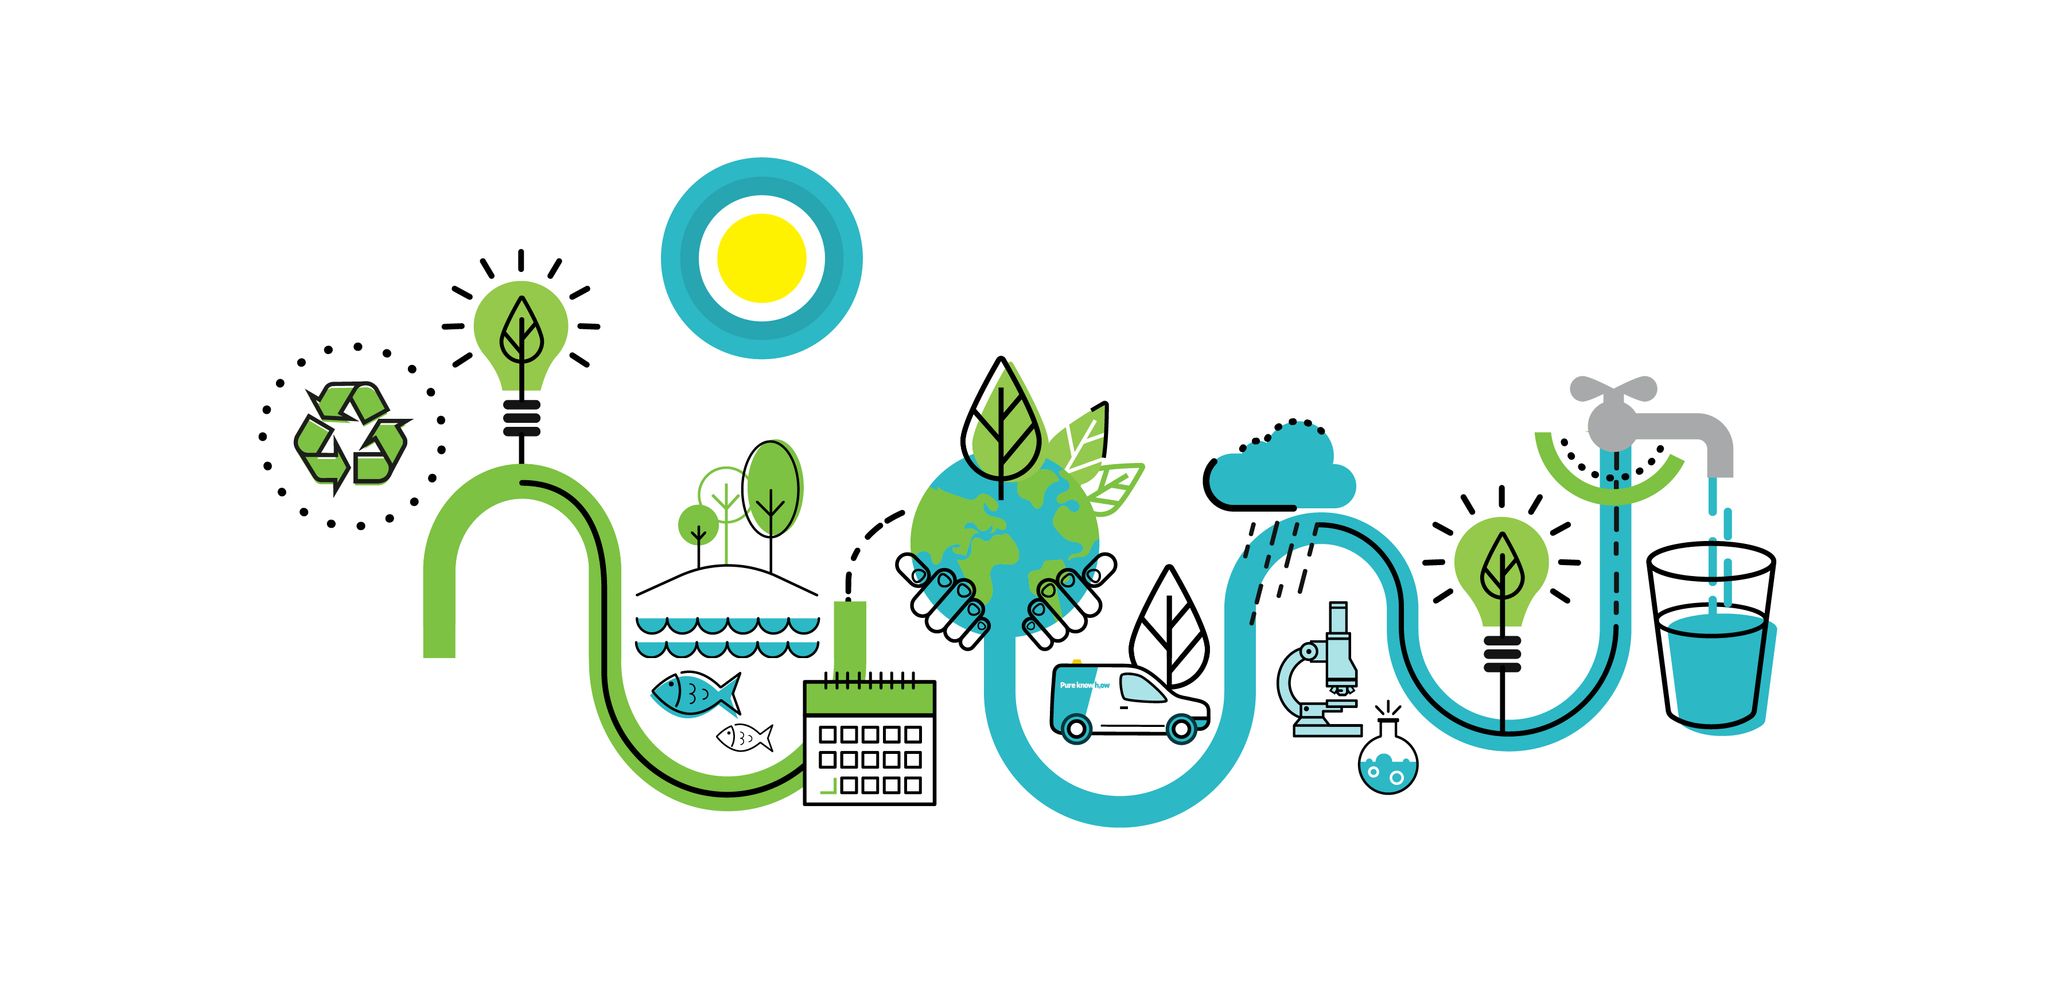 An infographic showing different symbols along a zig zag journey, that depict all the elements relevant for South East Water. Such as a carbon neutral 'recycle' symbol, a leaf in a lightbulb to represent nature based solutions, a planet and leaves to show the environment, a South East Water van, microscope and finally a tap filling up a glass of water. 